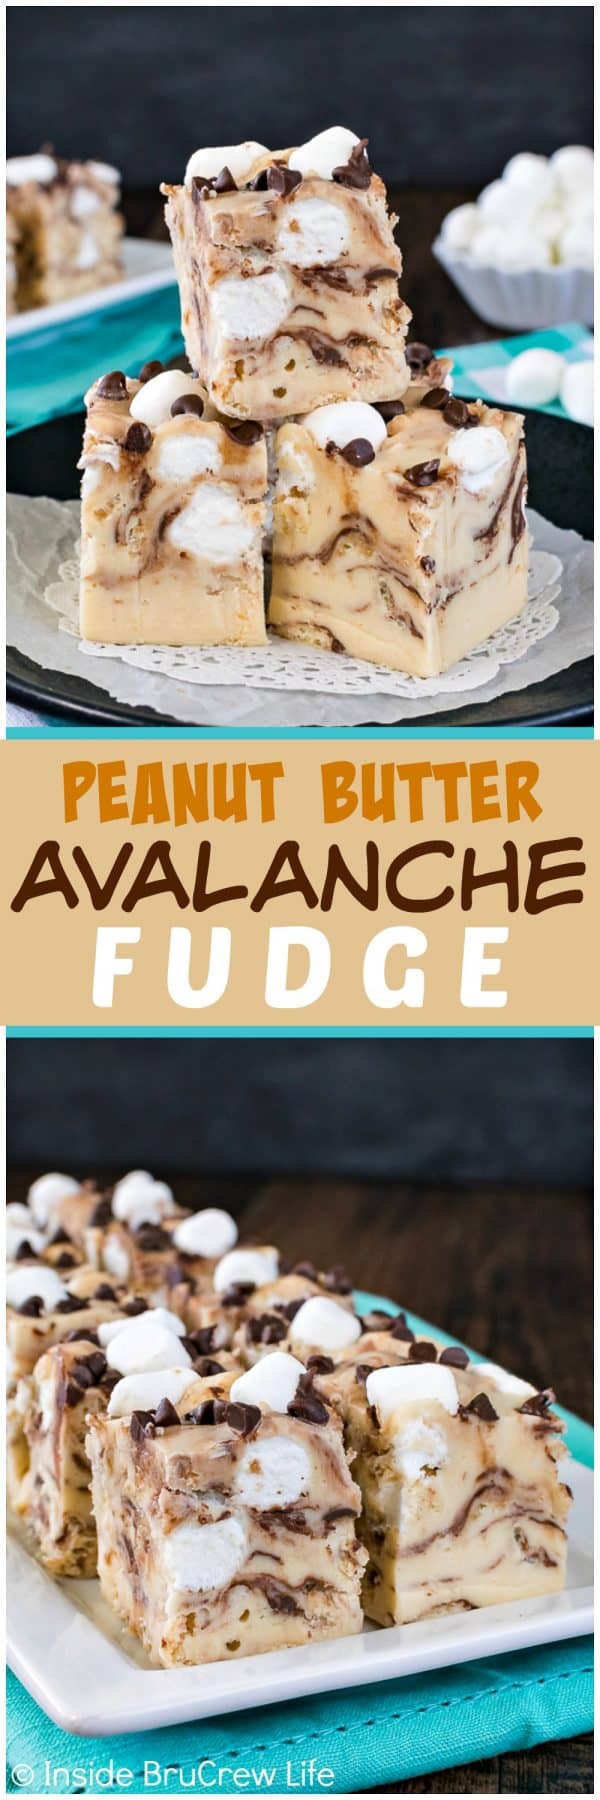 Peanut Butter Avalanche Fudge - this creamy no bake peanut butter fudge is loaded with chocolate, marshmallows, and cereal. Easy recipe to make for holiday parties and cookie exchanges!